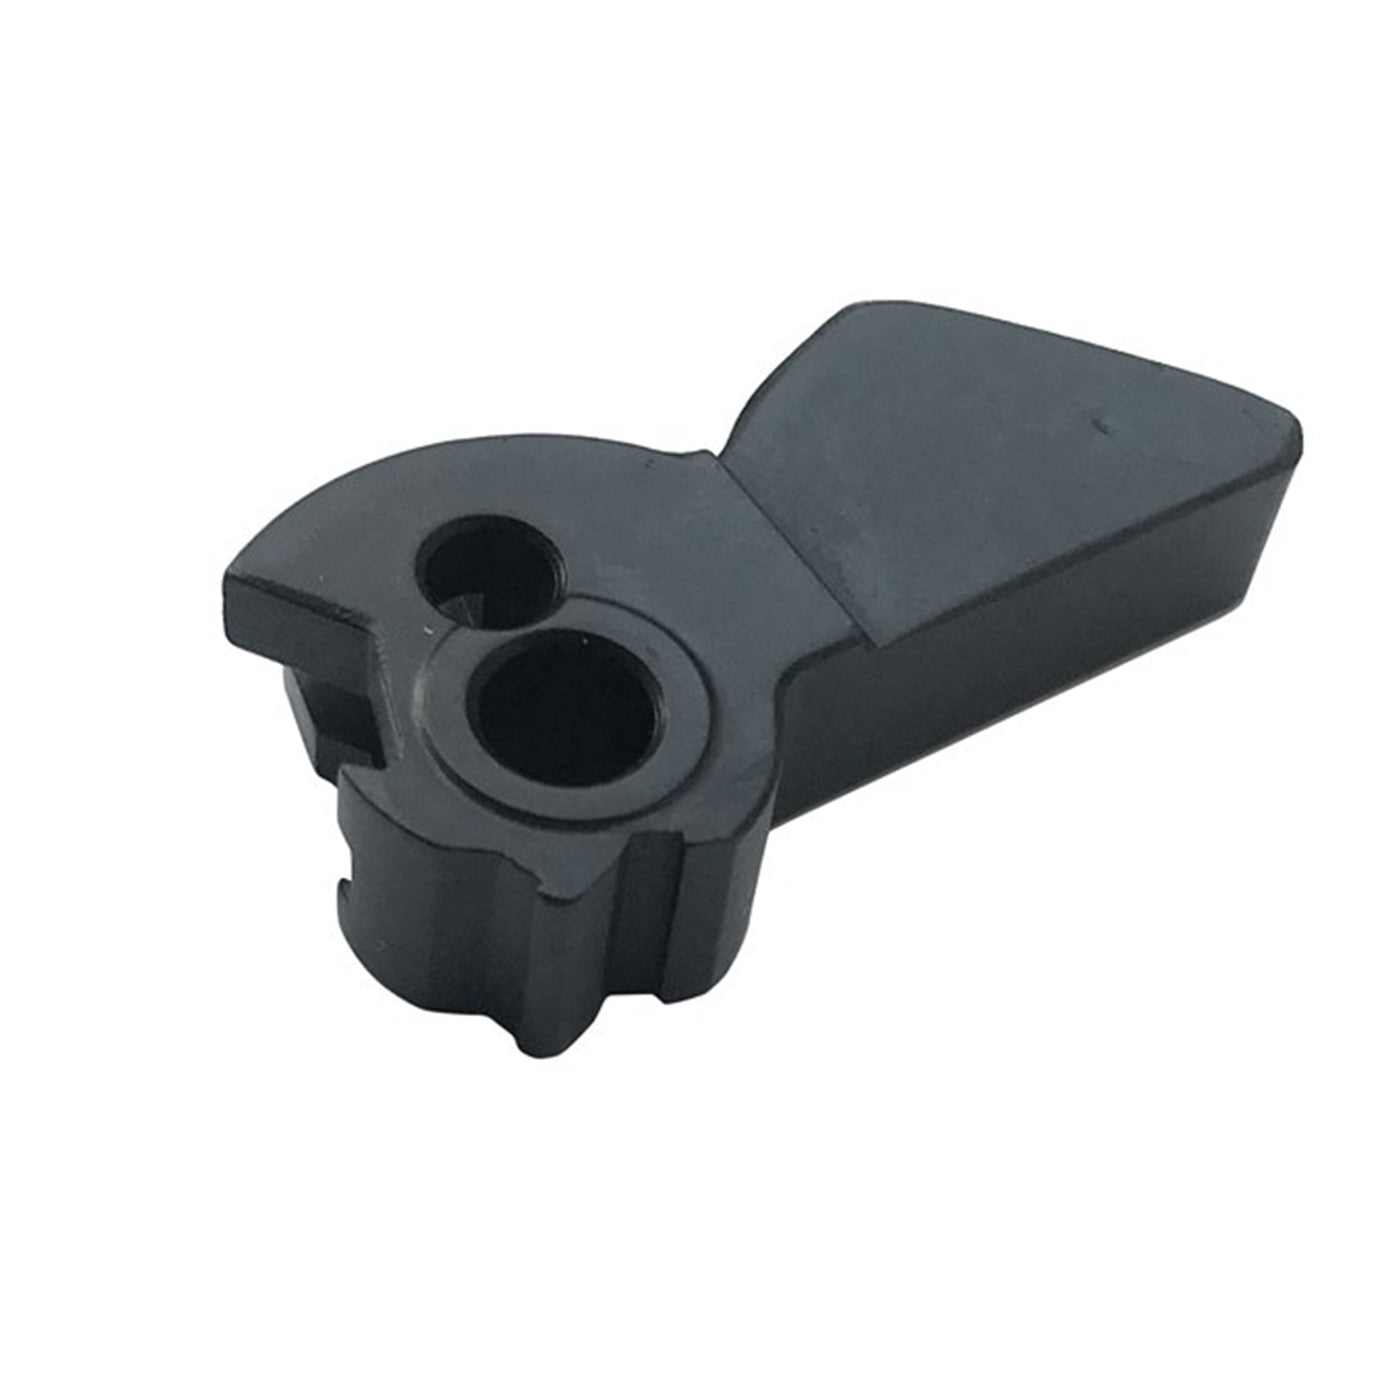 PX4 Low Profile Hammer